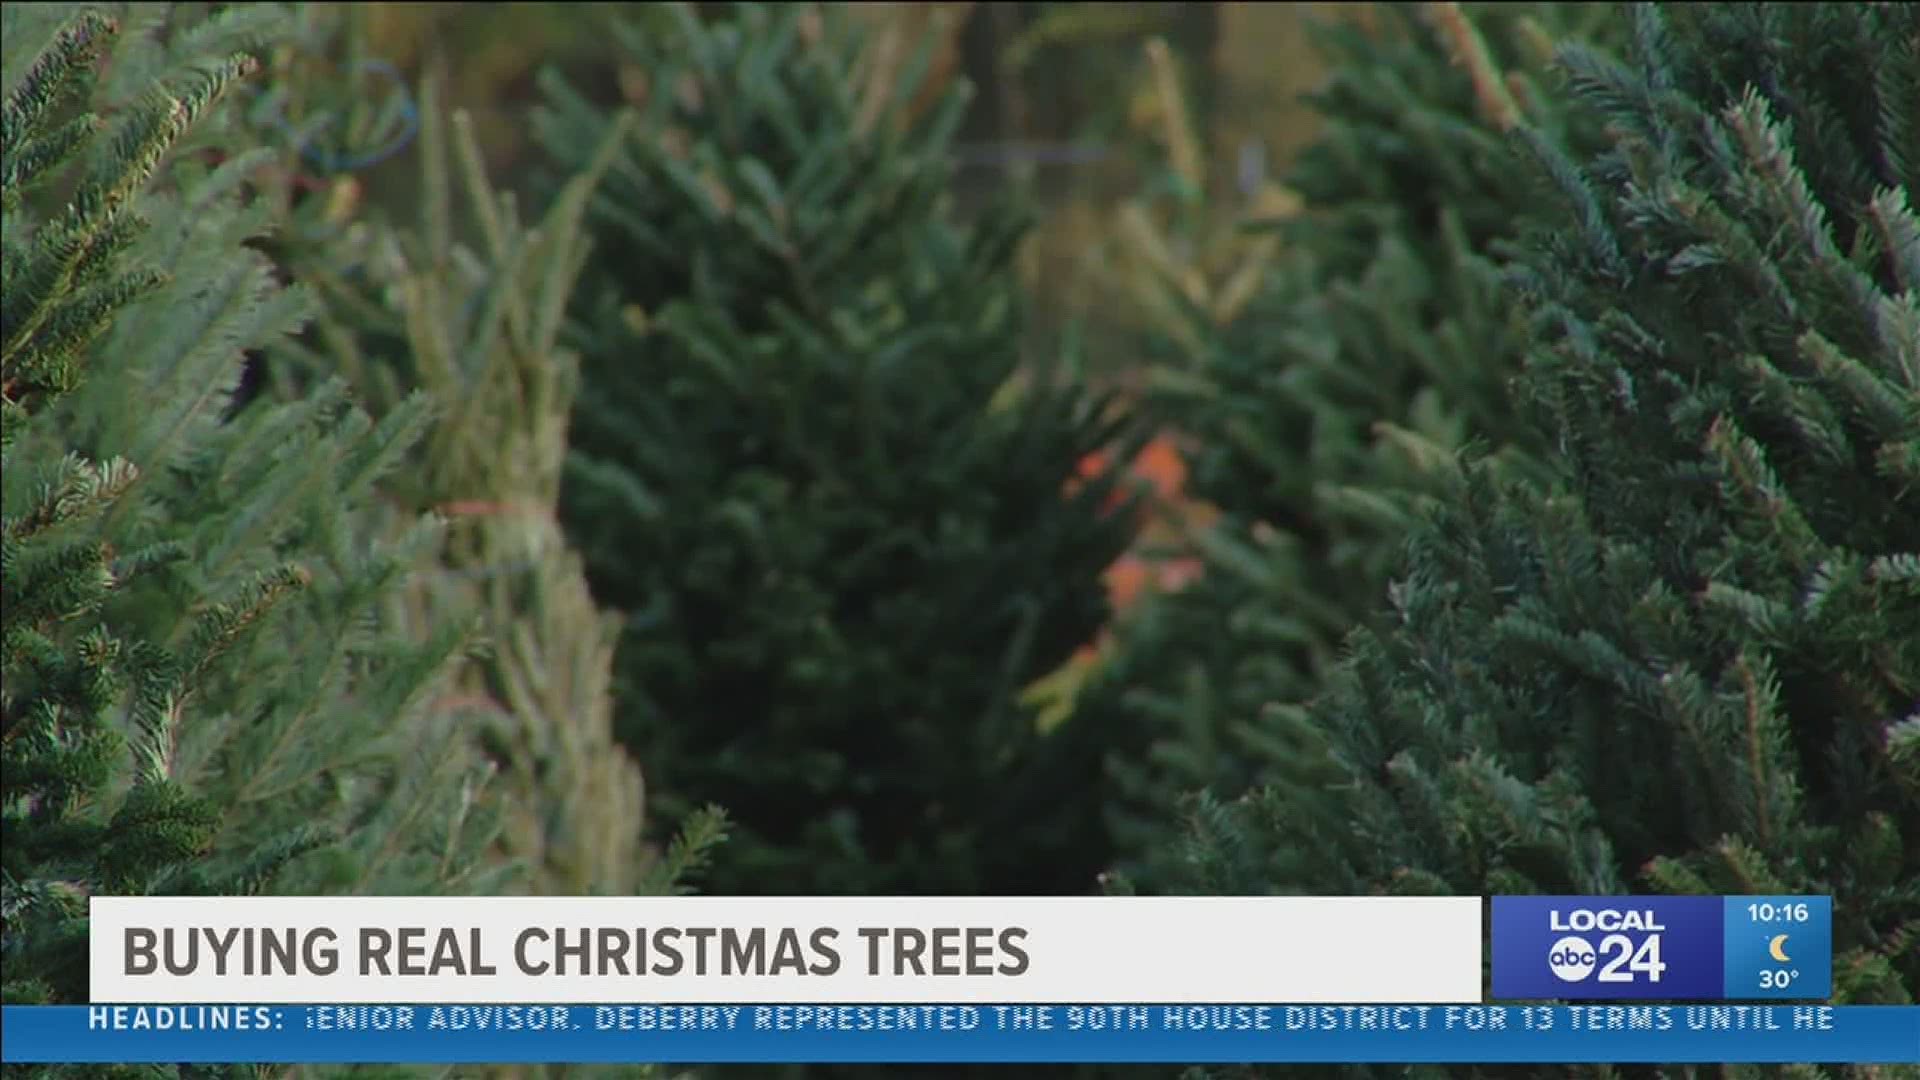 Real Christmas trees are being used as a symbol of joy amid a difficult year.